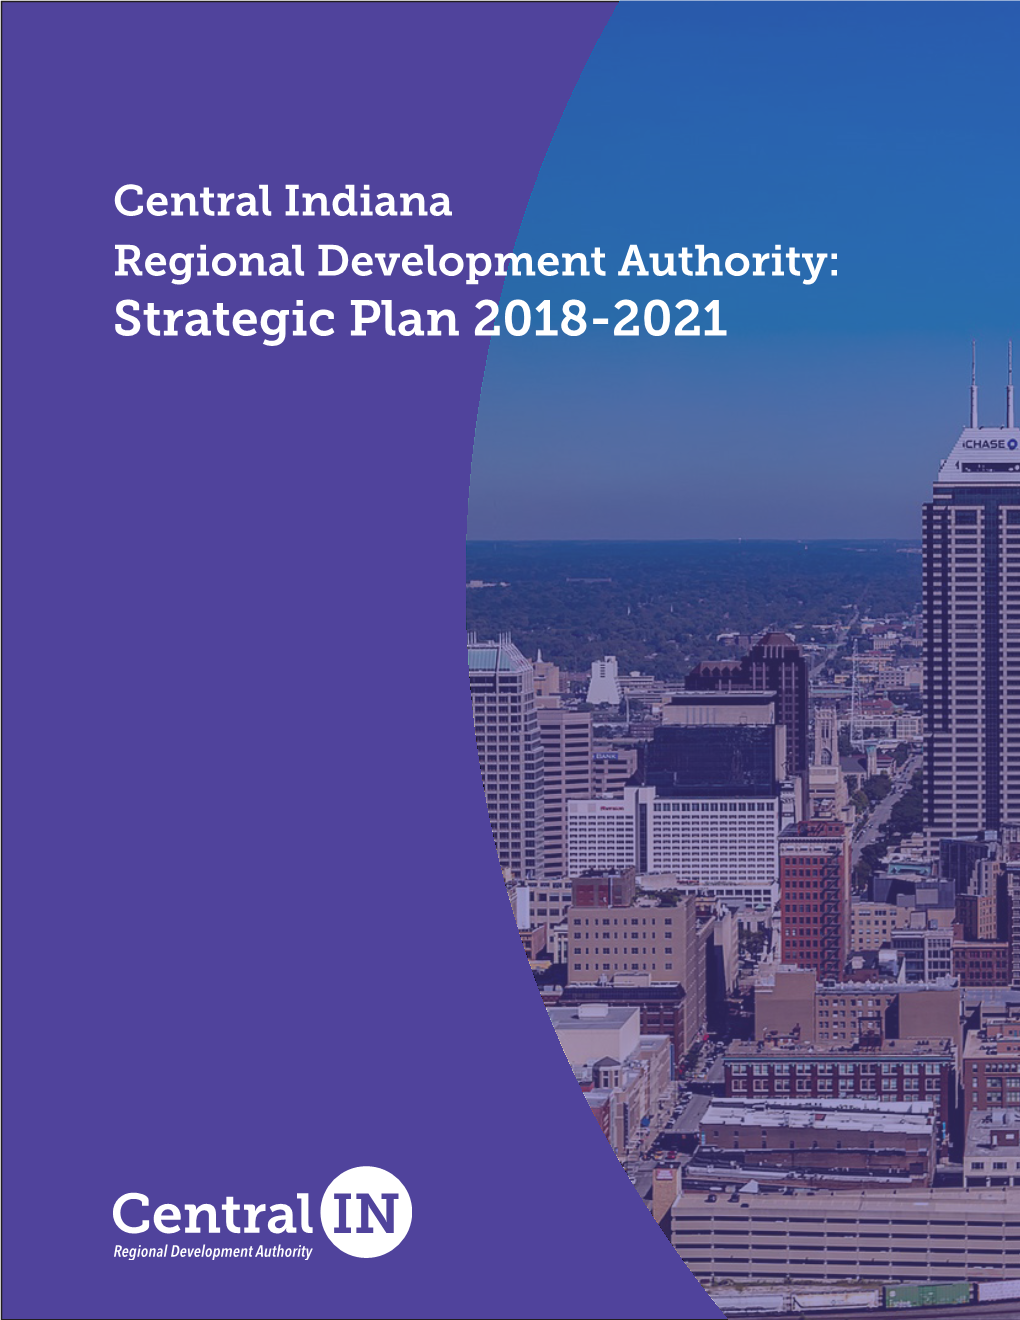 Strategic Plan 2018-2021 Table of Contents